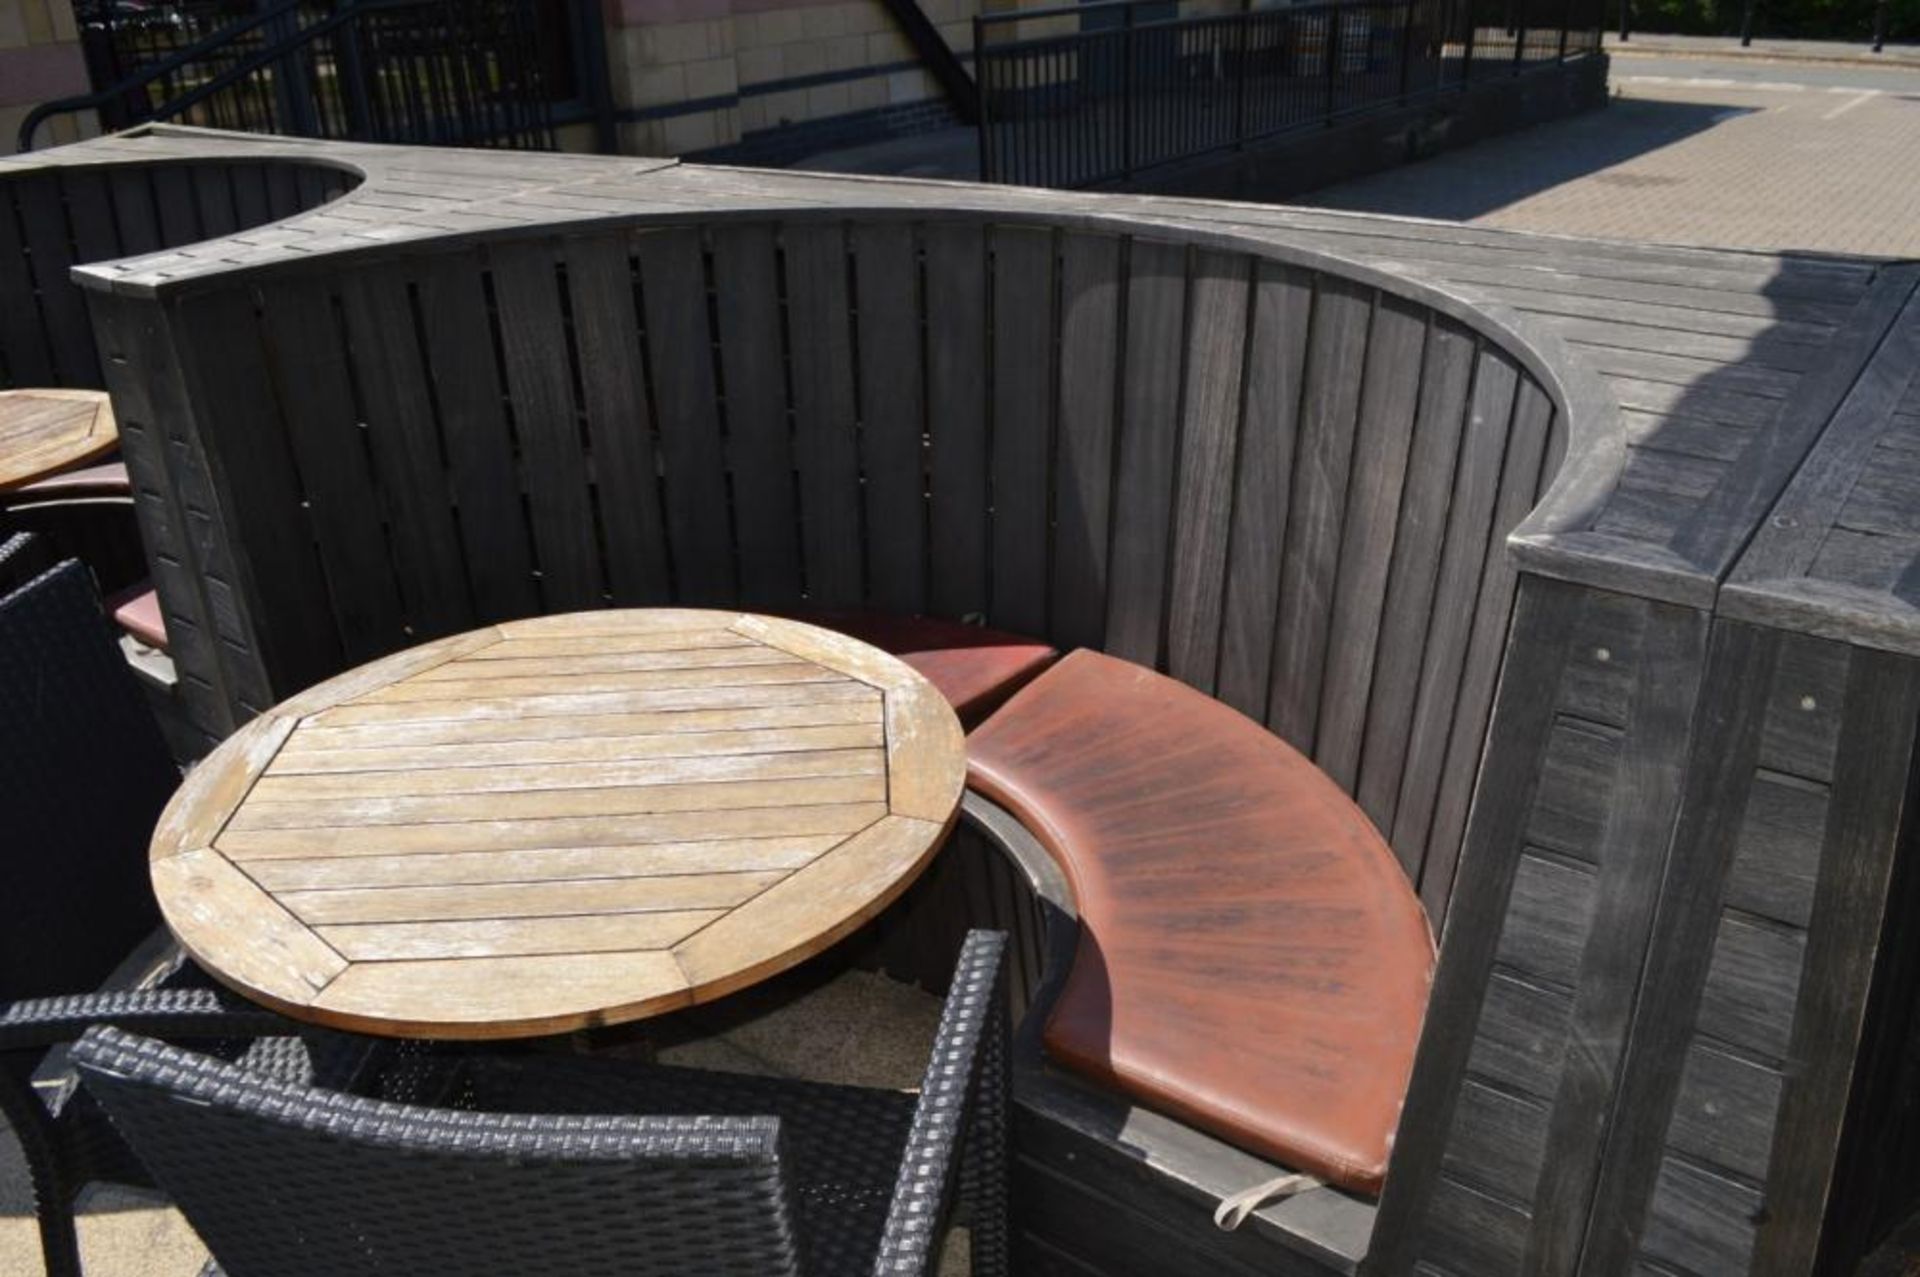 2 x Wooden Outdoor Seating Booths - Each Measure H111 x W203 x D106 cms - CL390 - Location: - Image 7 of 8